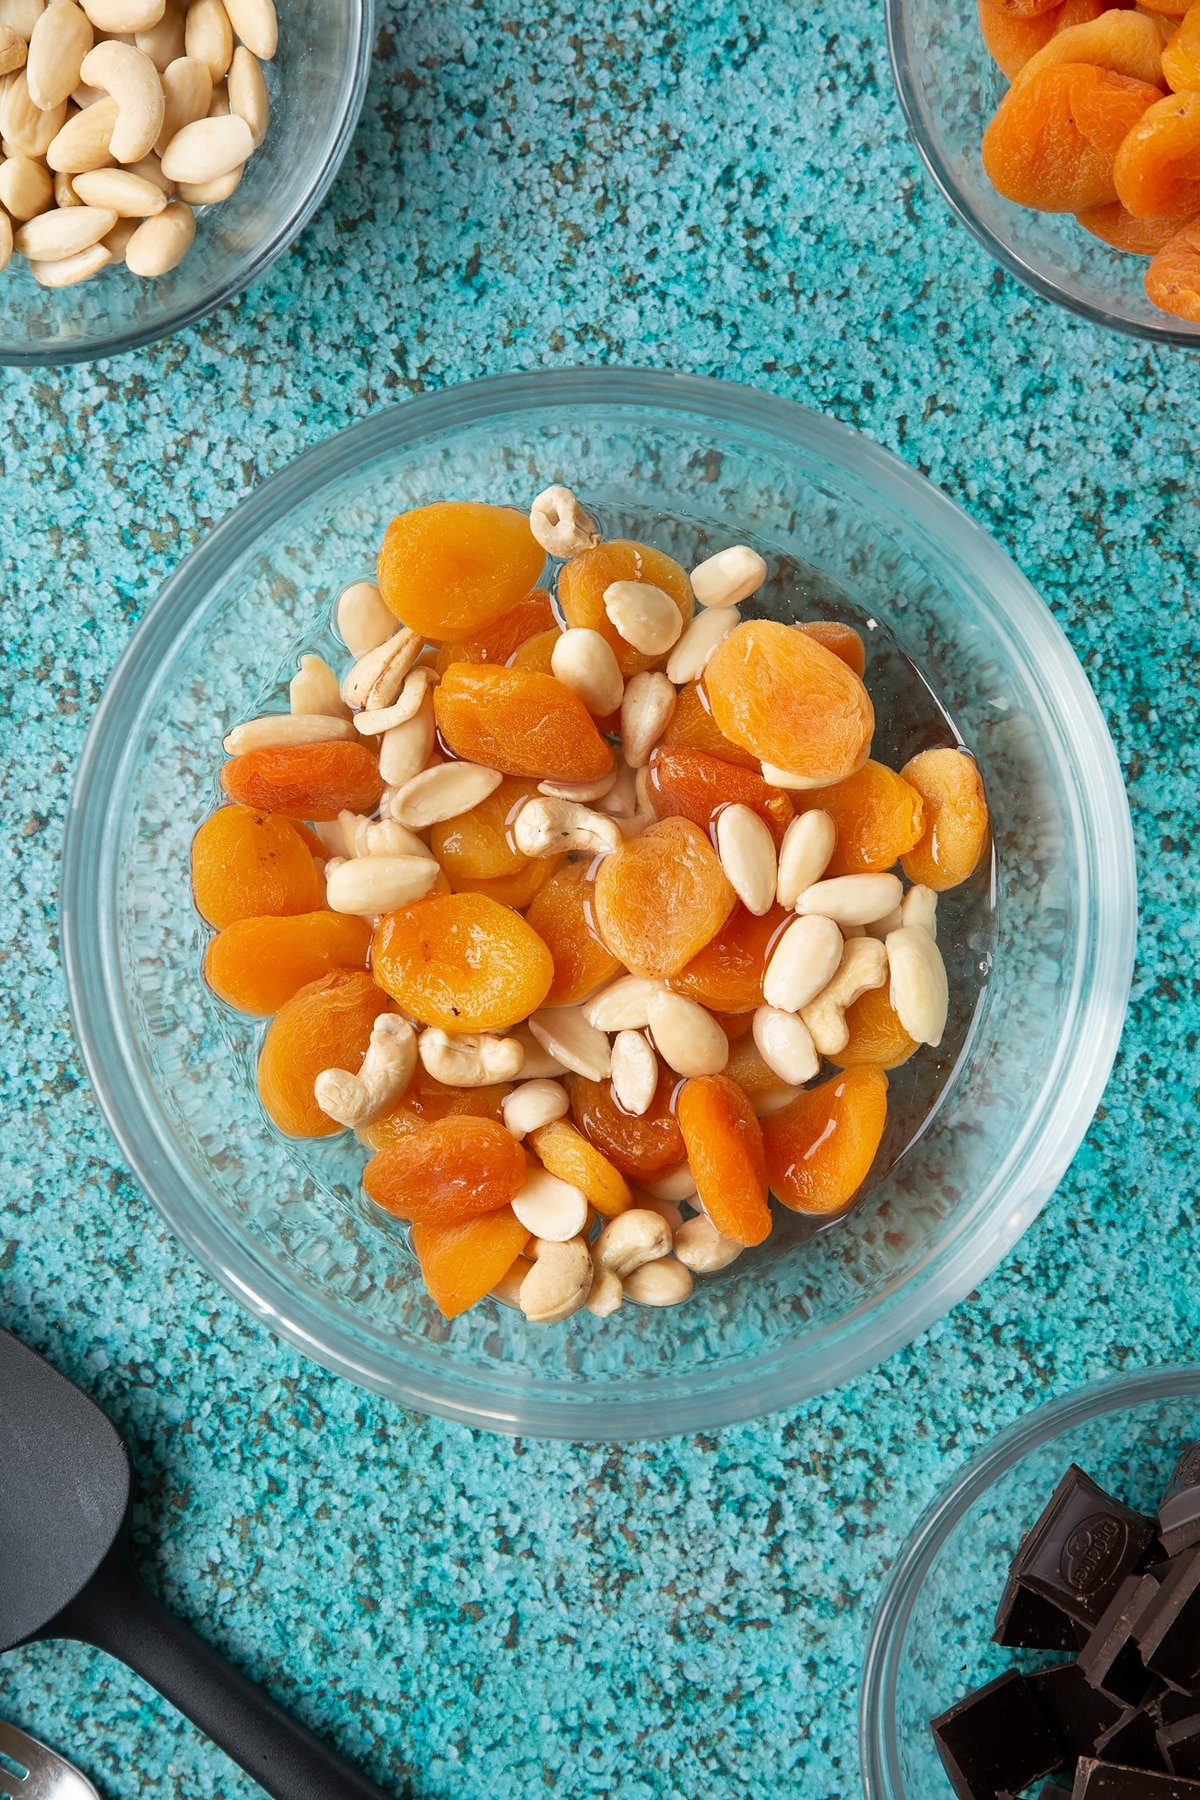 A mixing bowl containing blanched almonds, apricots and a few cashews soaking in hot water. Ingredients to make chocolate apricot balls surround the ball.